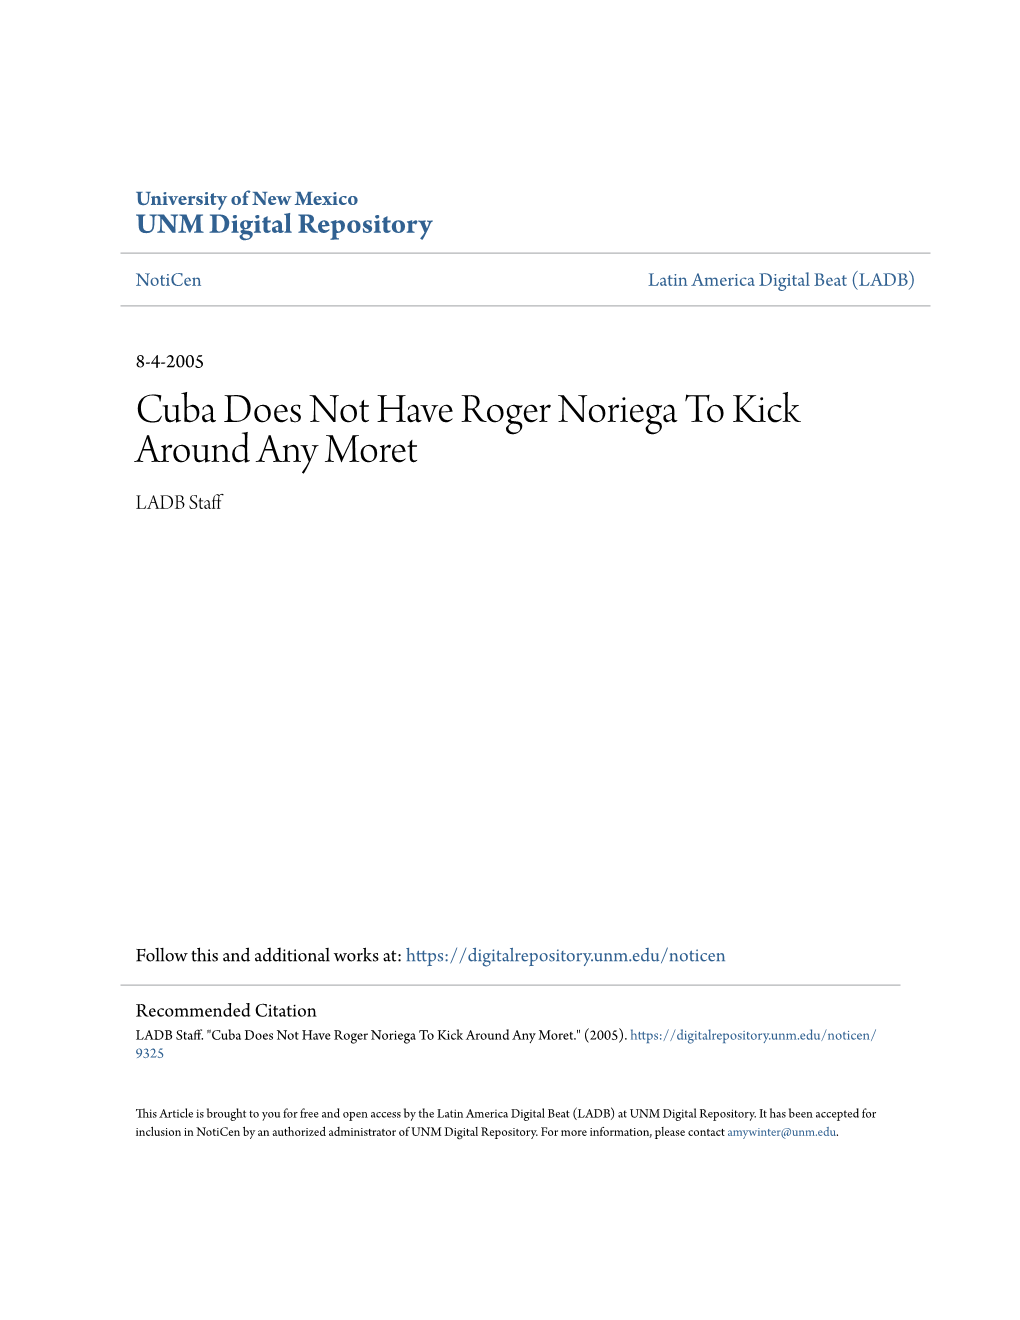 Cuba Does Not Have Roger Noriega to Kick Around Any Moret LADB Staff